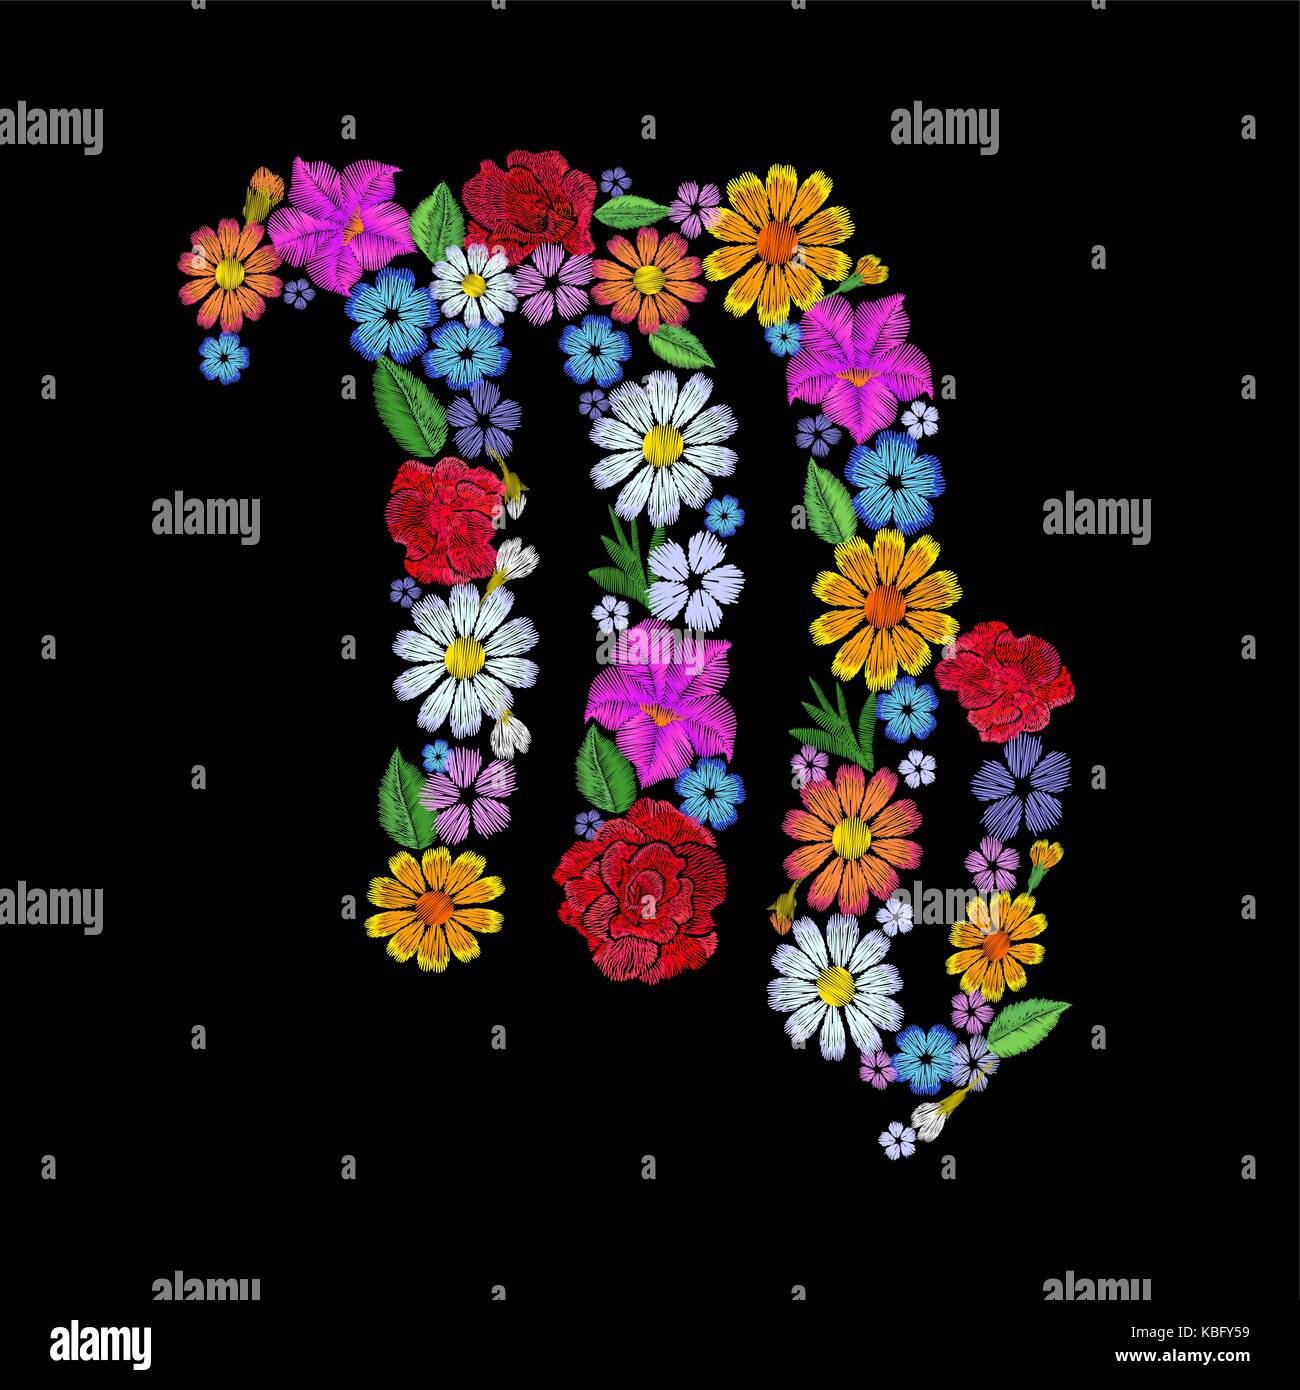 Virgo zodiac sign flower arrangement. Horoscope astrology fashion floral embroidery patch design template. Texture stitch effect. Textile print on black background vector illustration Stock Vector